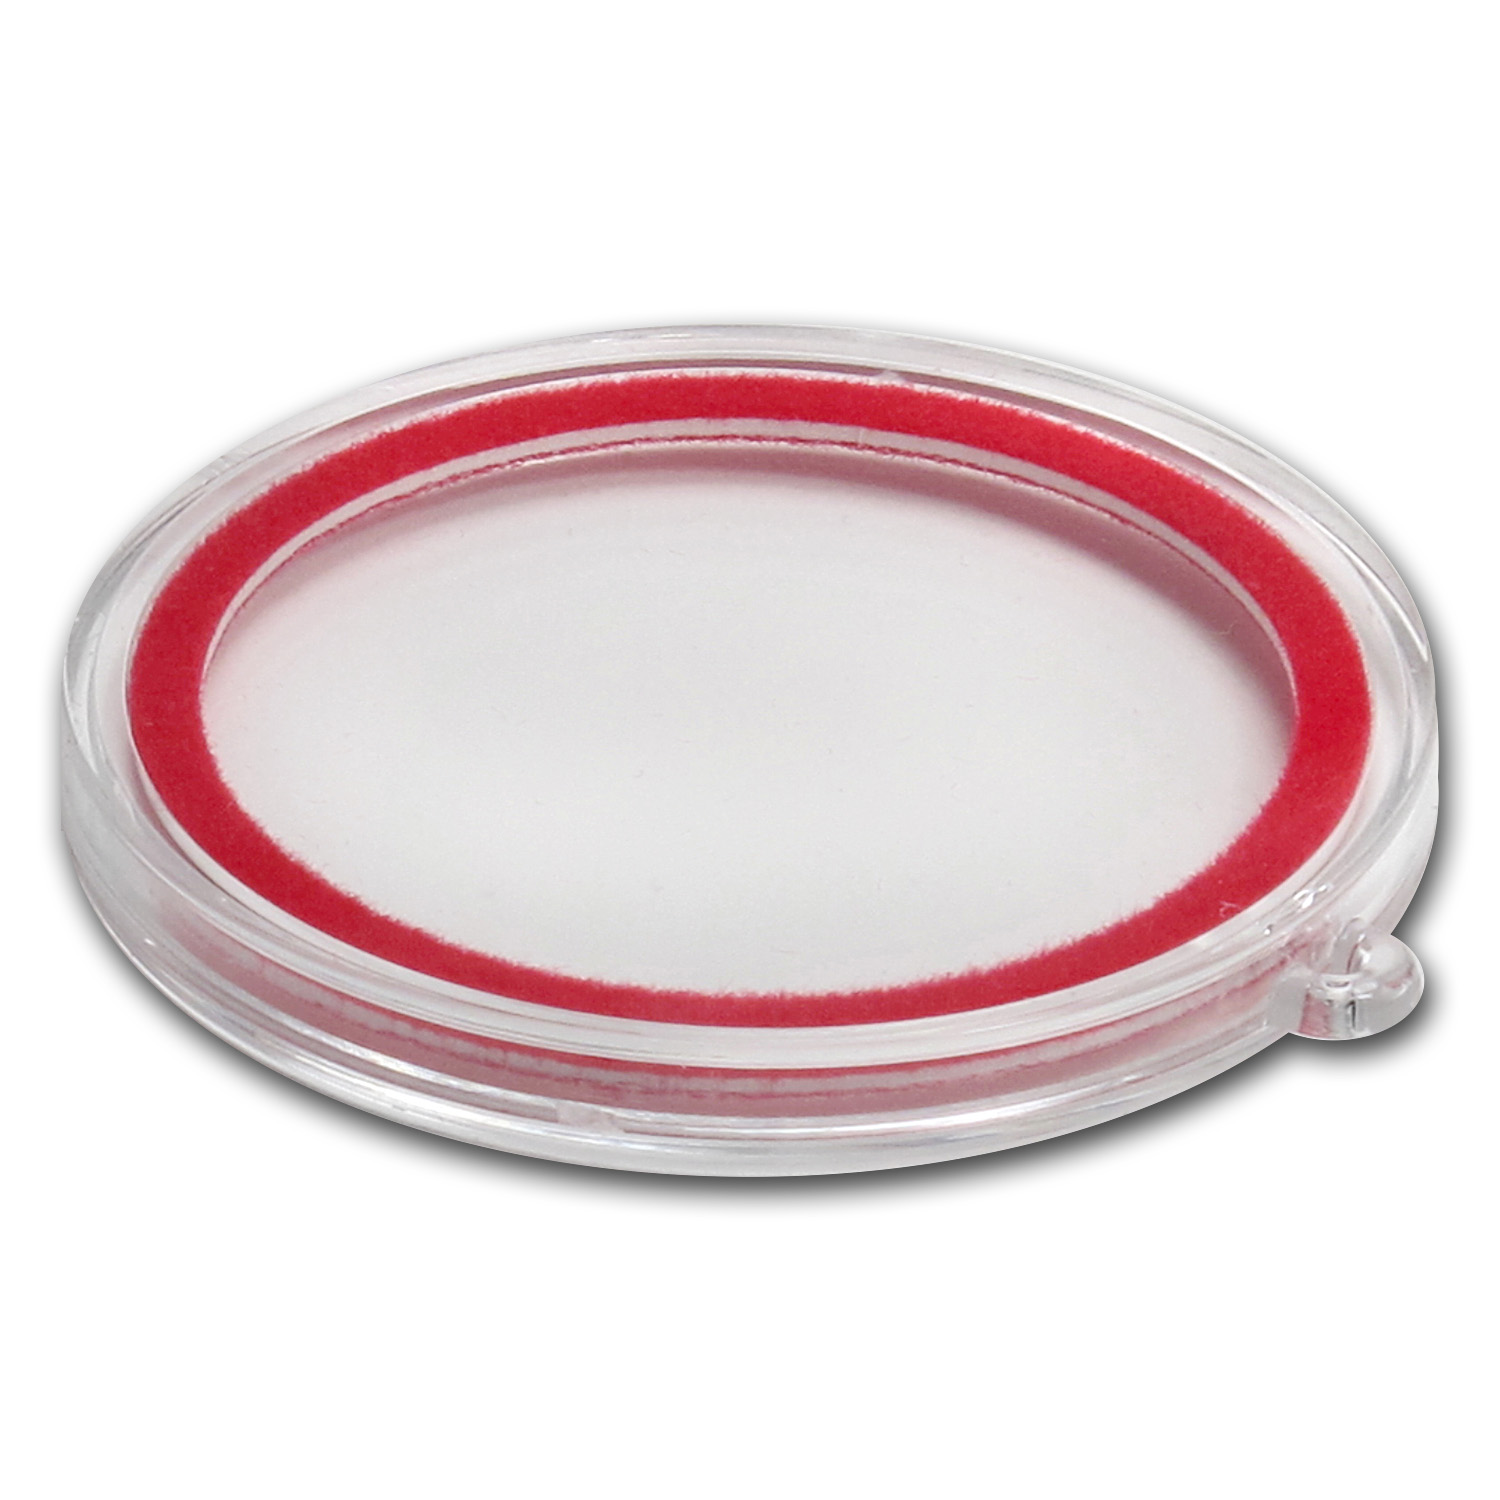 Buy Ornament Capsule for Silver Coins/Rounds - 39mm (Red Ring)